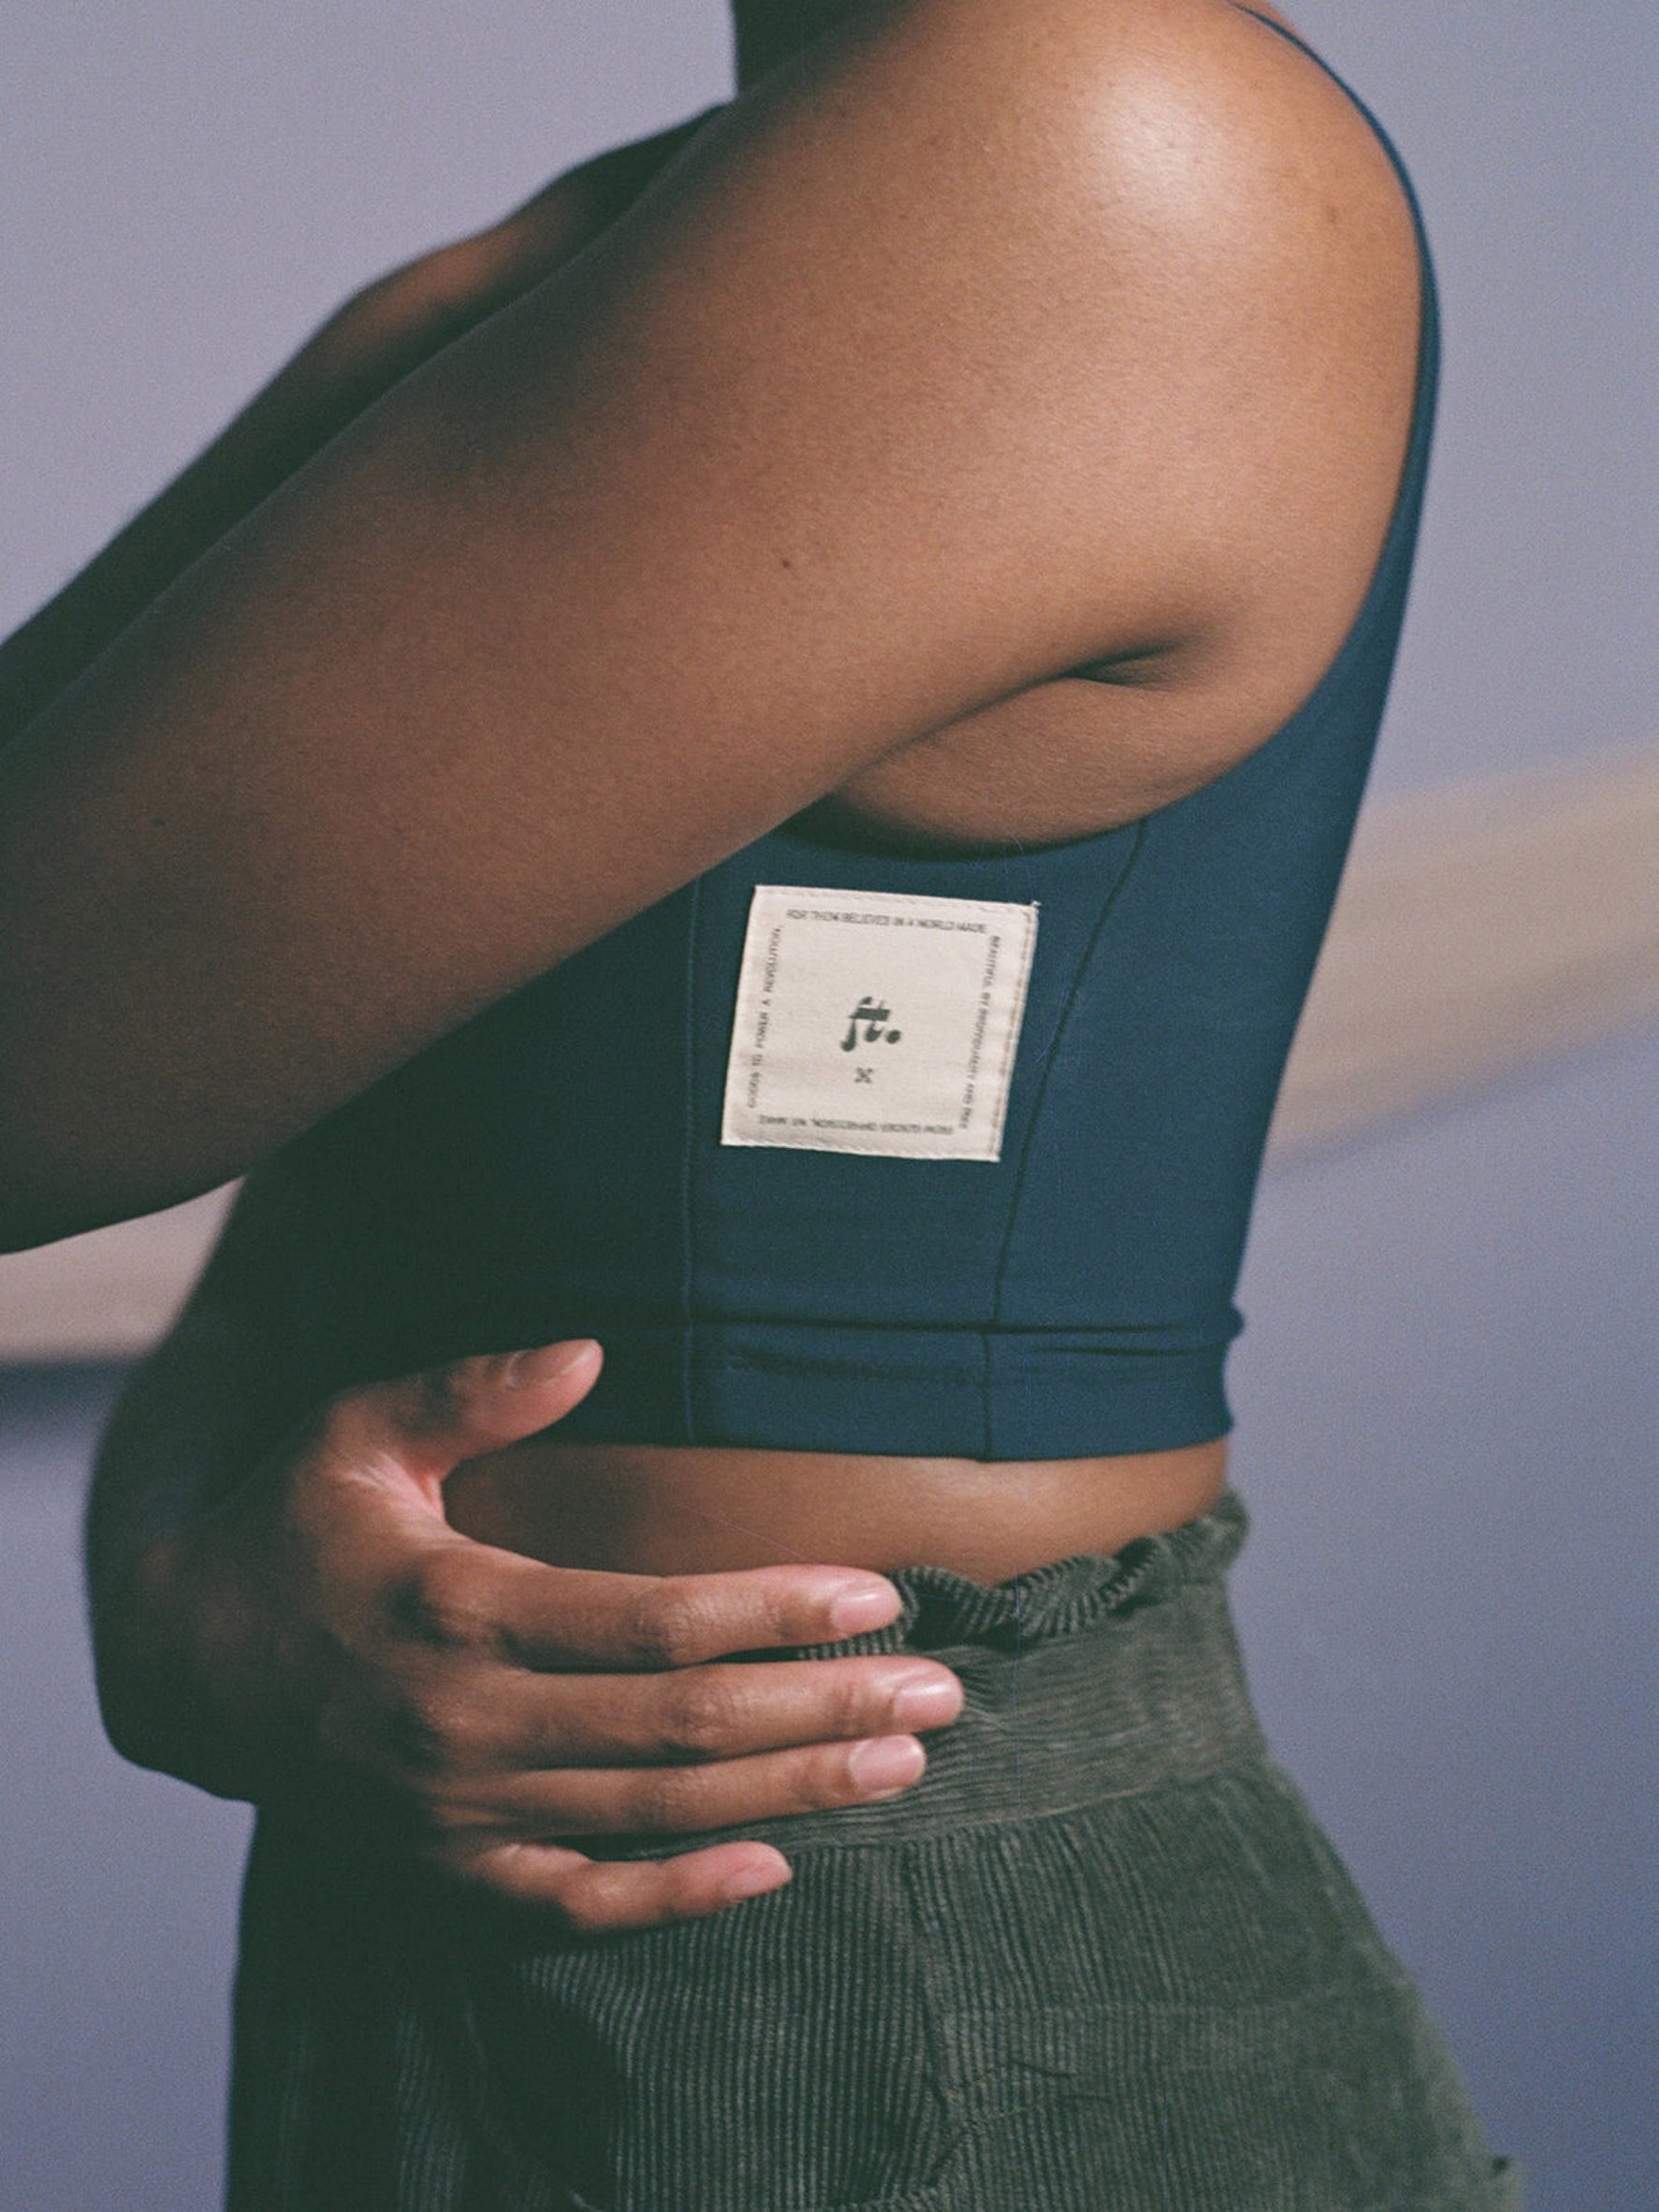 What is a chest binder? #binder #nonbinary #queer #transgender #lgbtq 